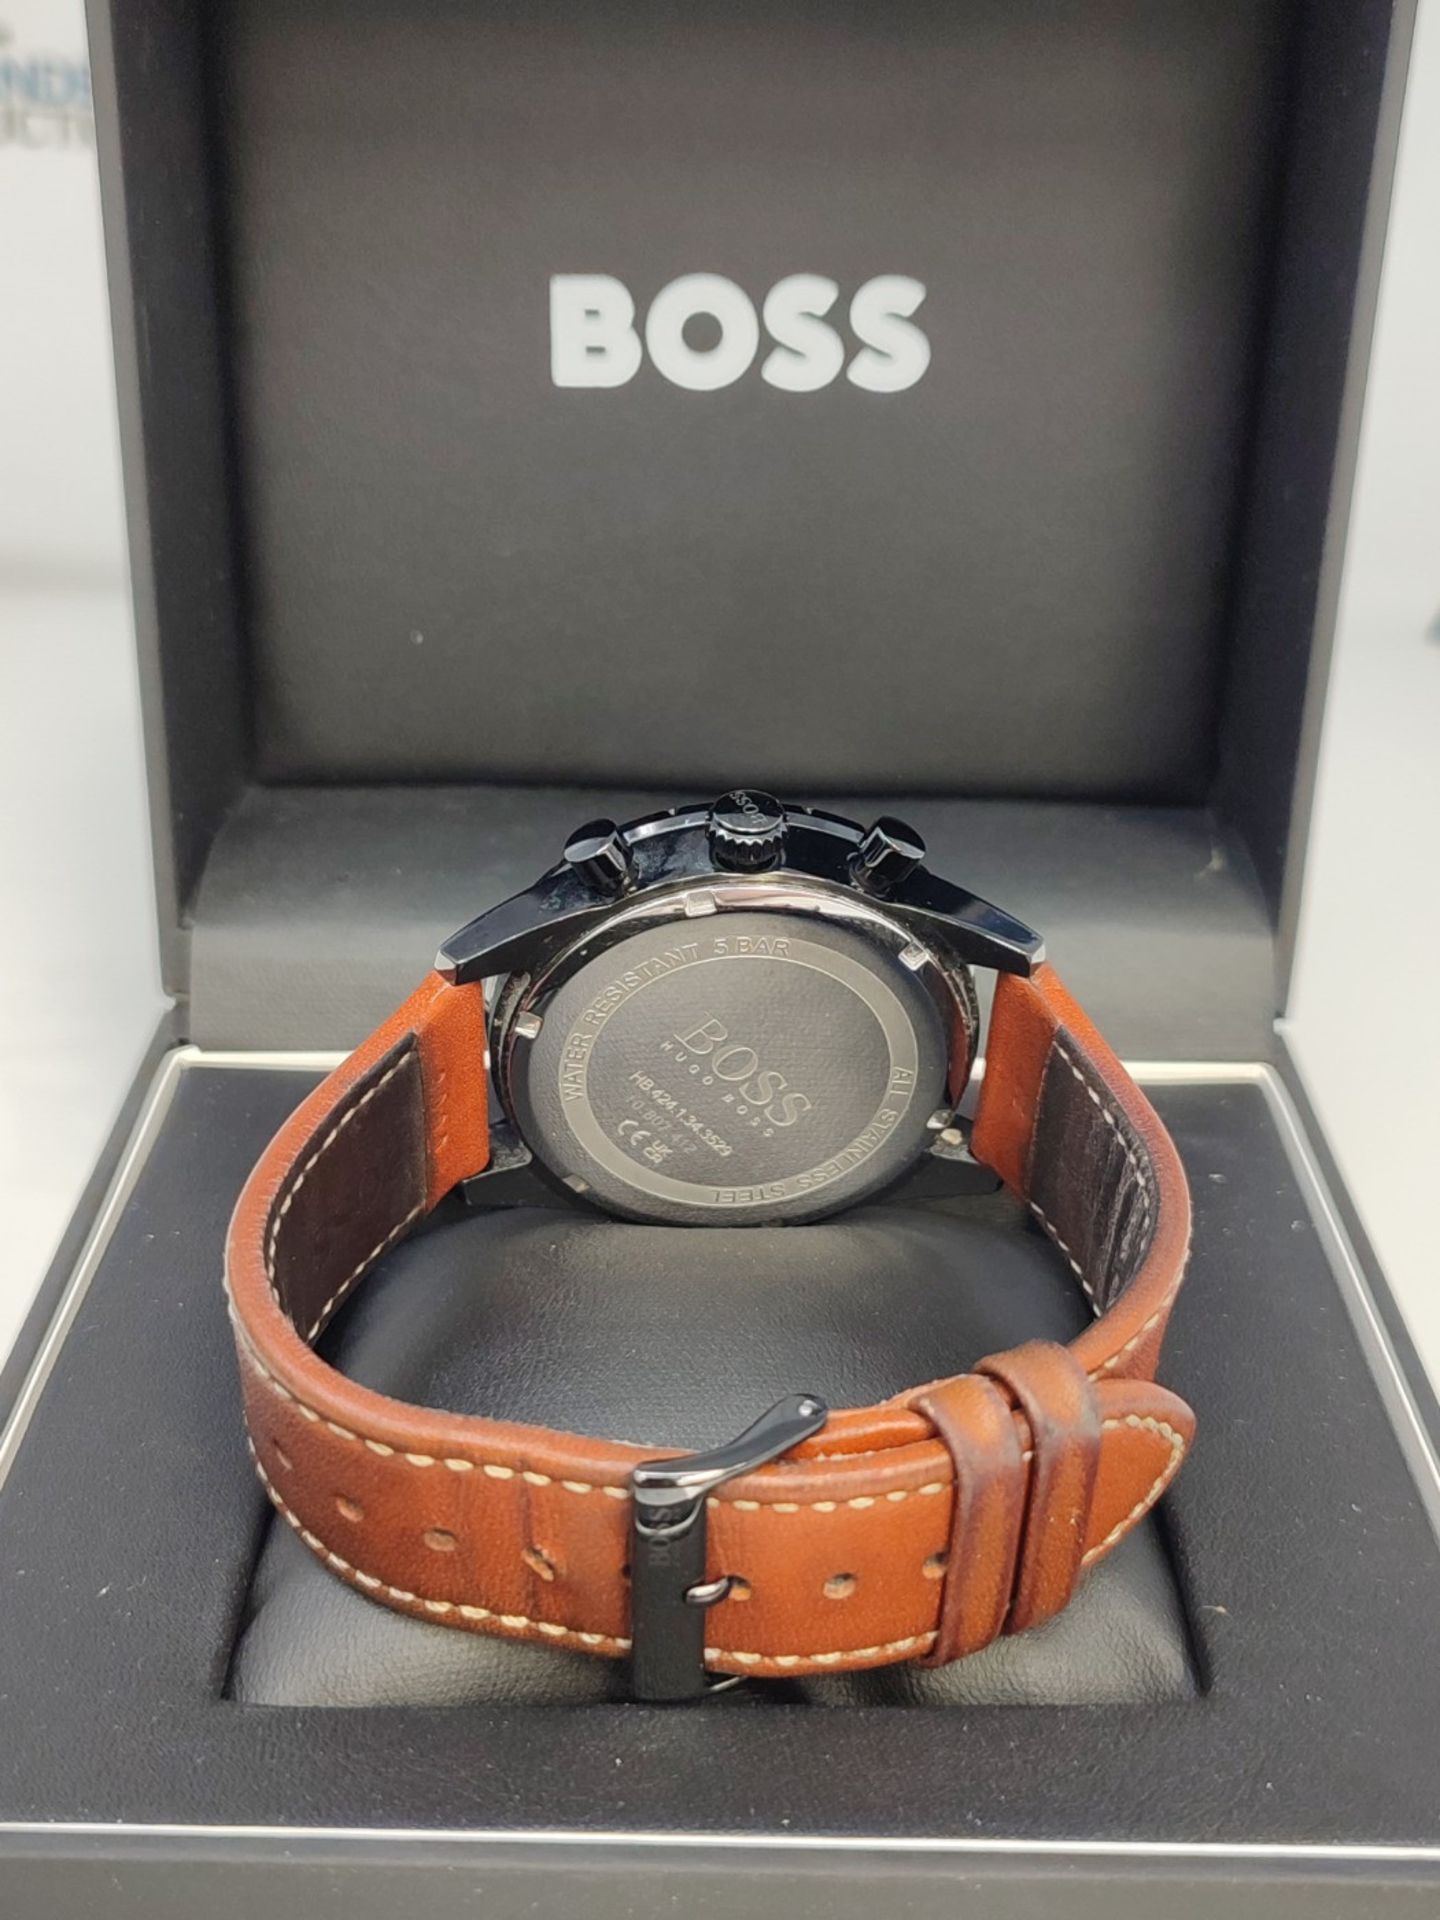 RRP £213.00 BOSS Chronograph Quartz Watch for Men with Light Brown Leather Strap - 1513851 - Image 3 of 3